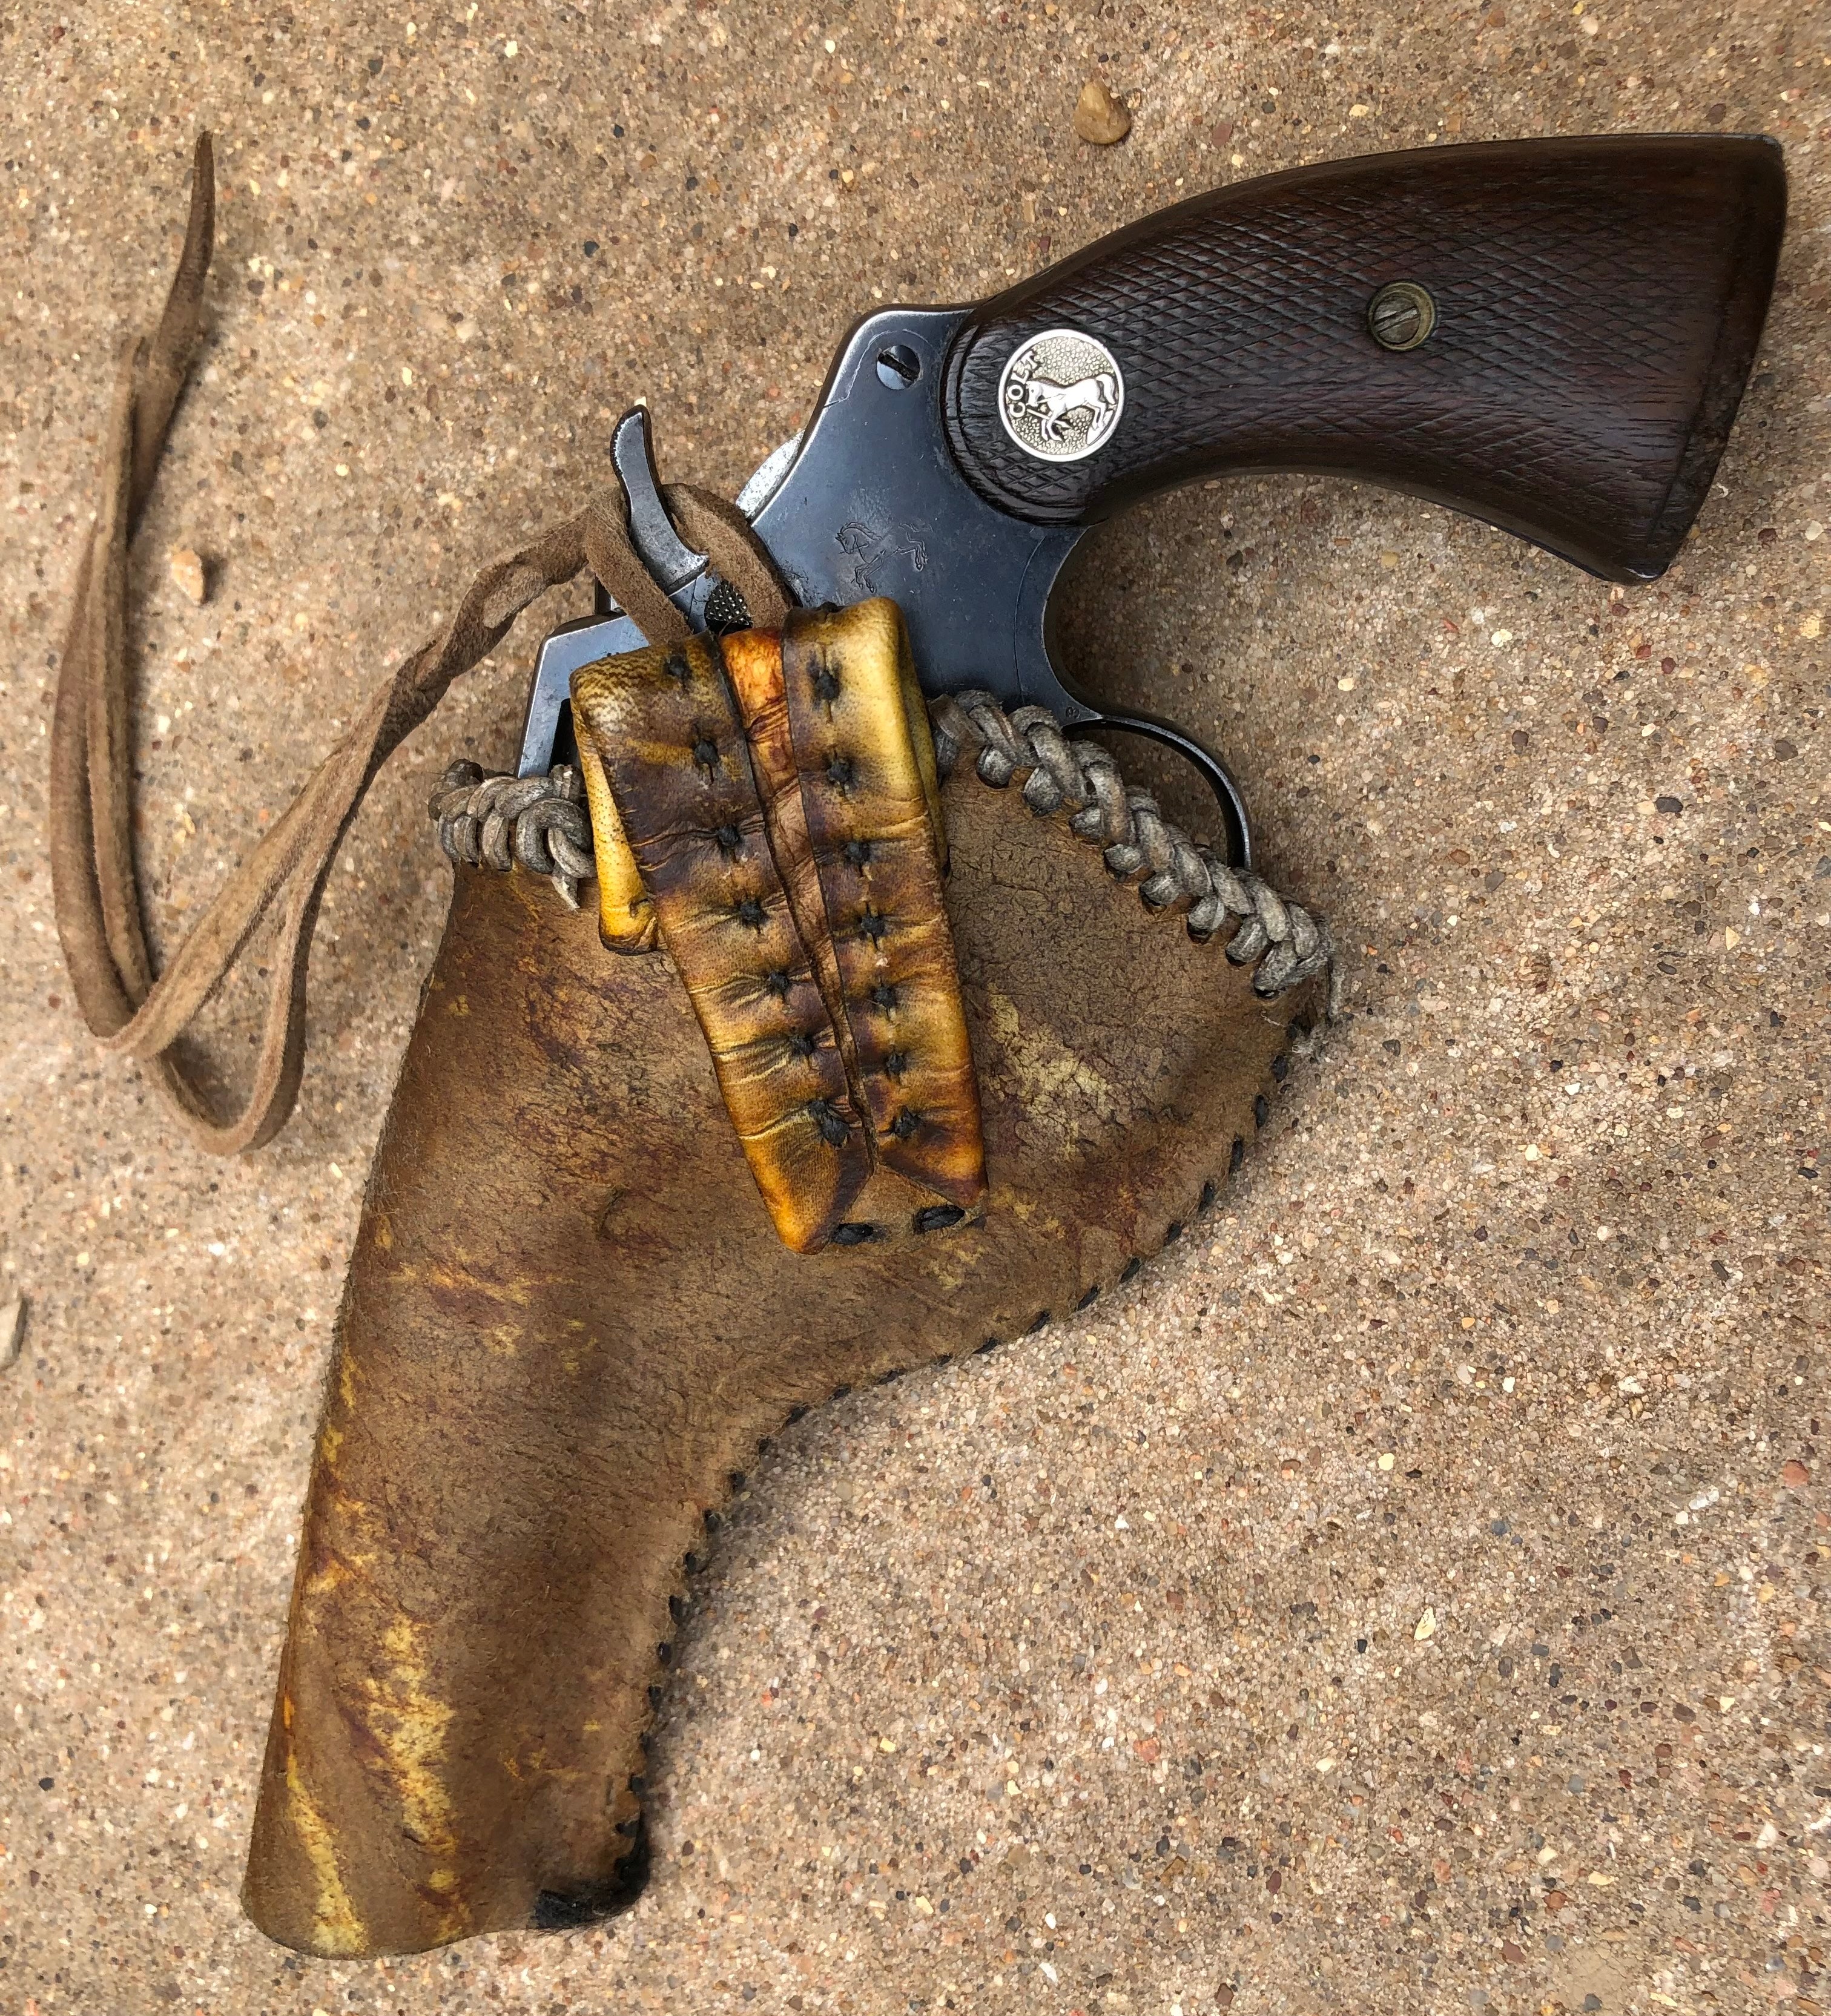 Jim Vaught - 100 +/-year old Colt .38 Police Positive rig and knife - #2 in the Jim Vaught collection